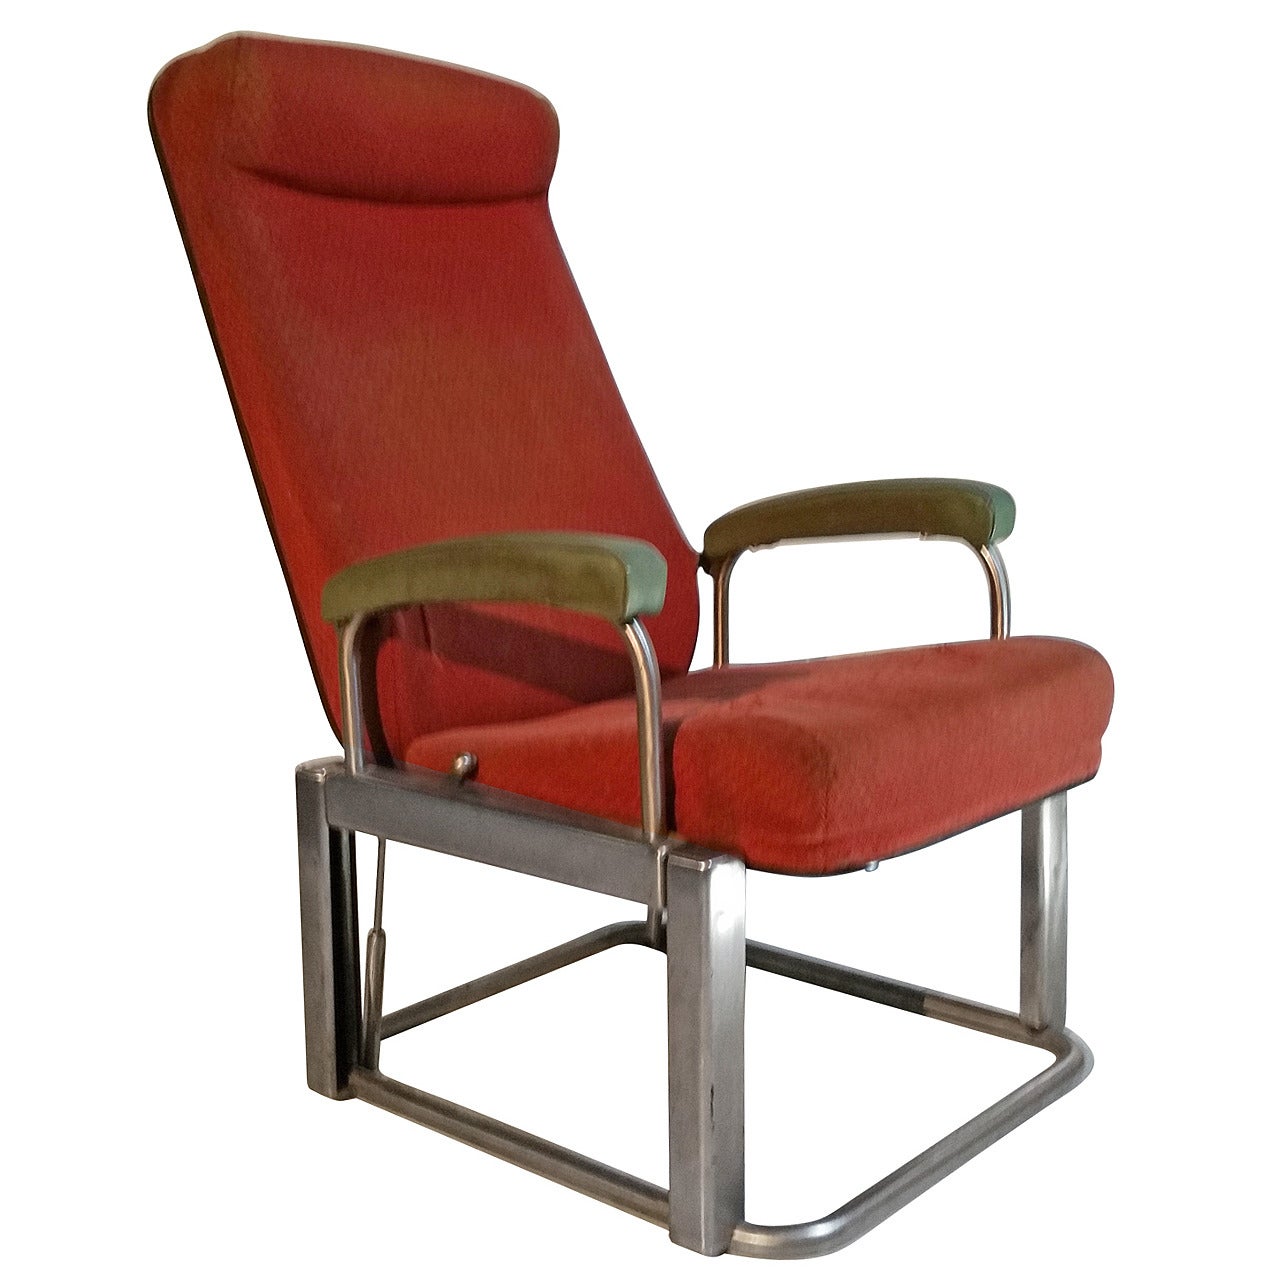 Henry Dreyfuss Industrial or Machine Age Lounge Chair for Pullman Train